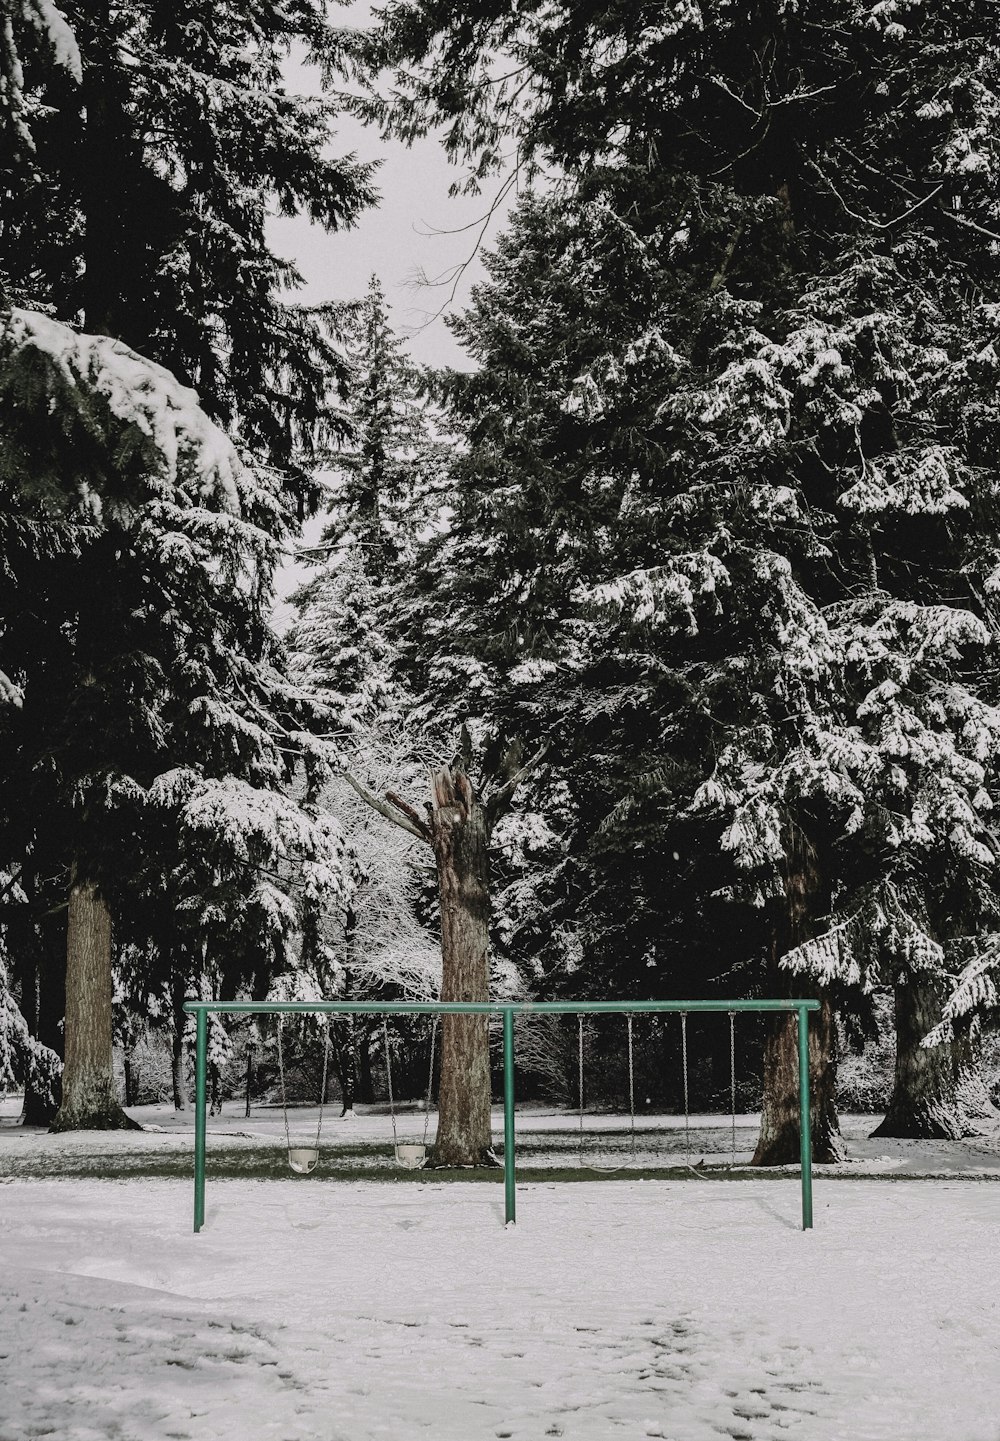 teal metal outdoor swings between trees covered with snow